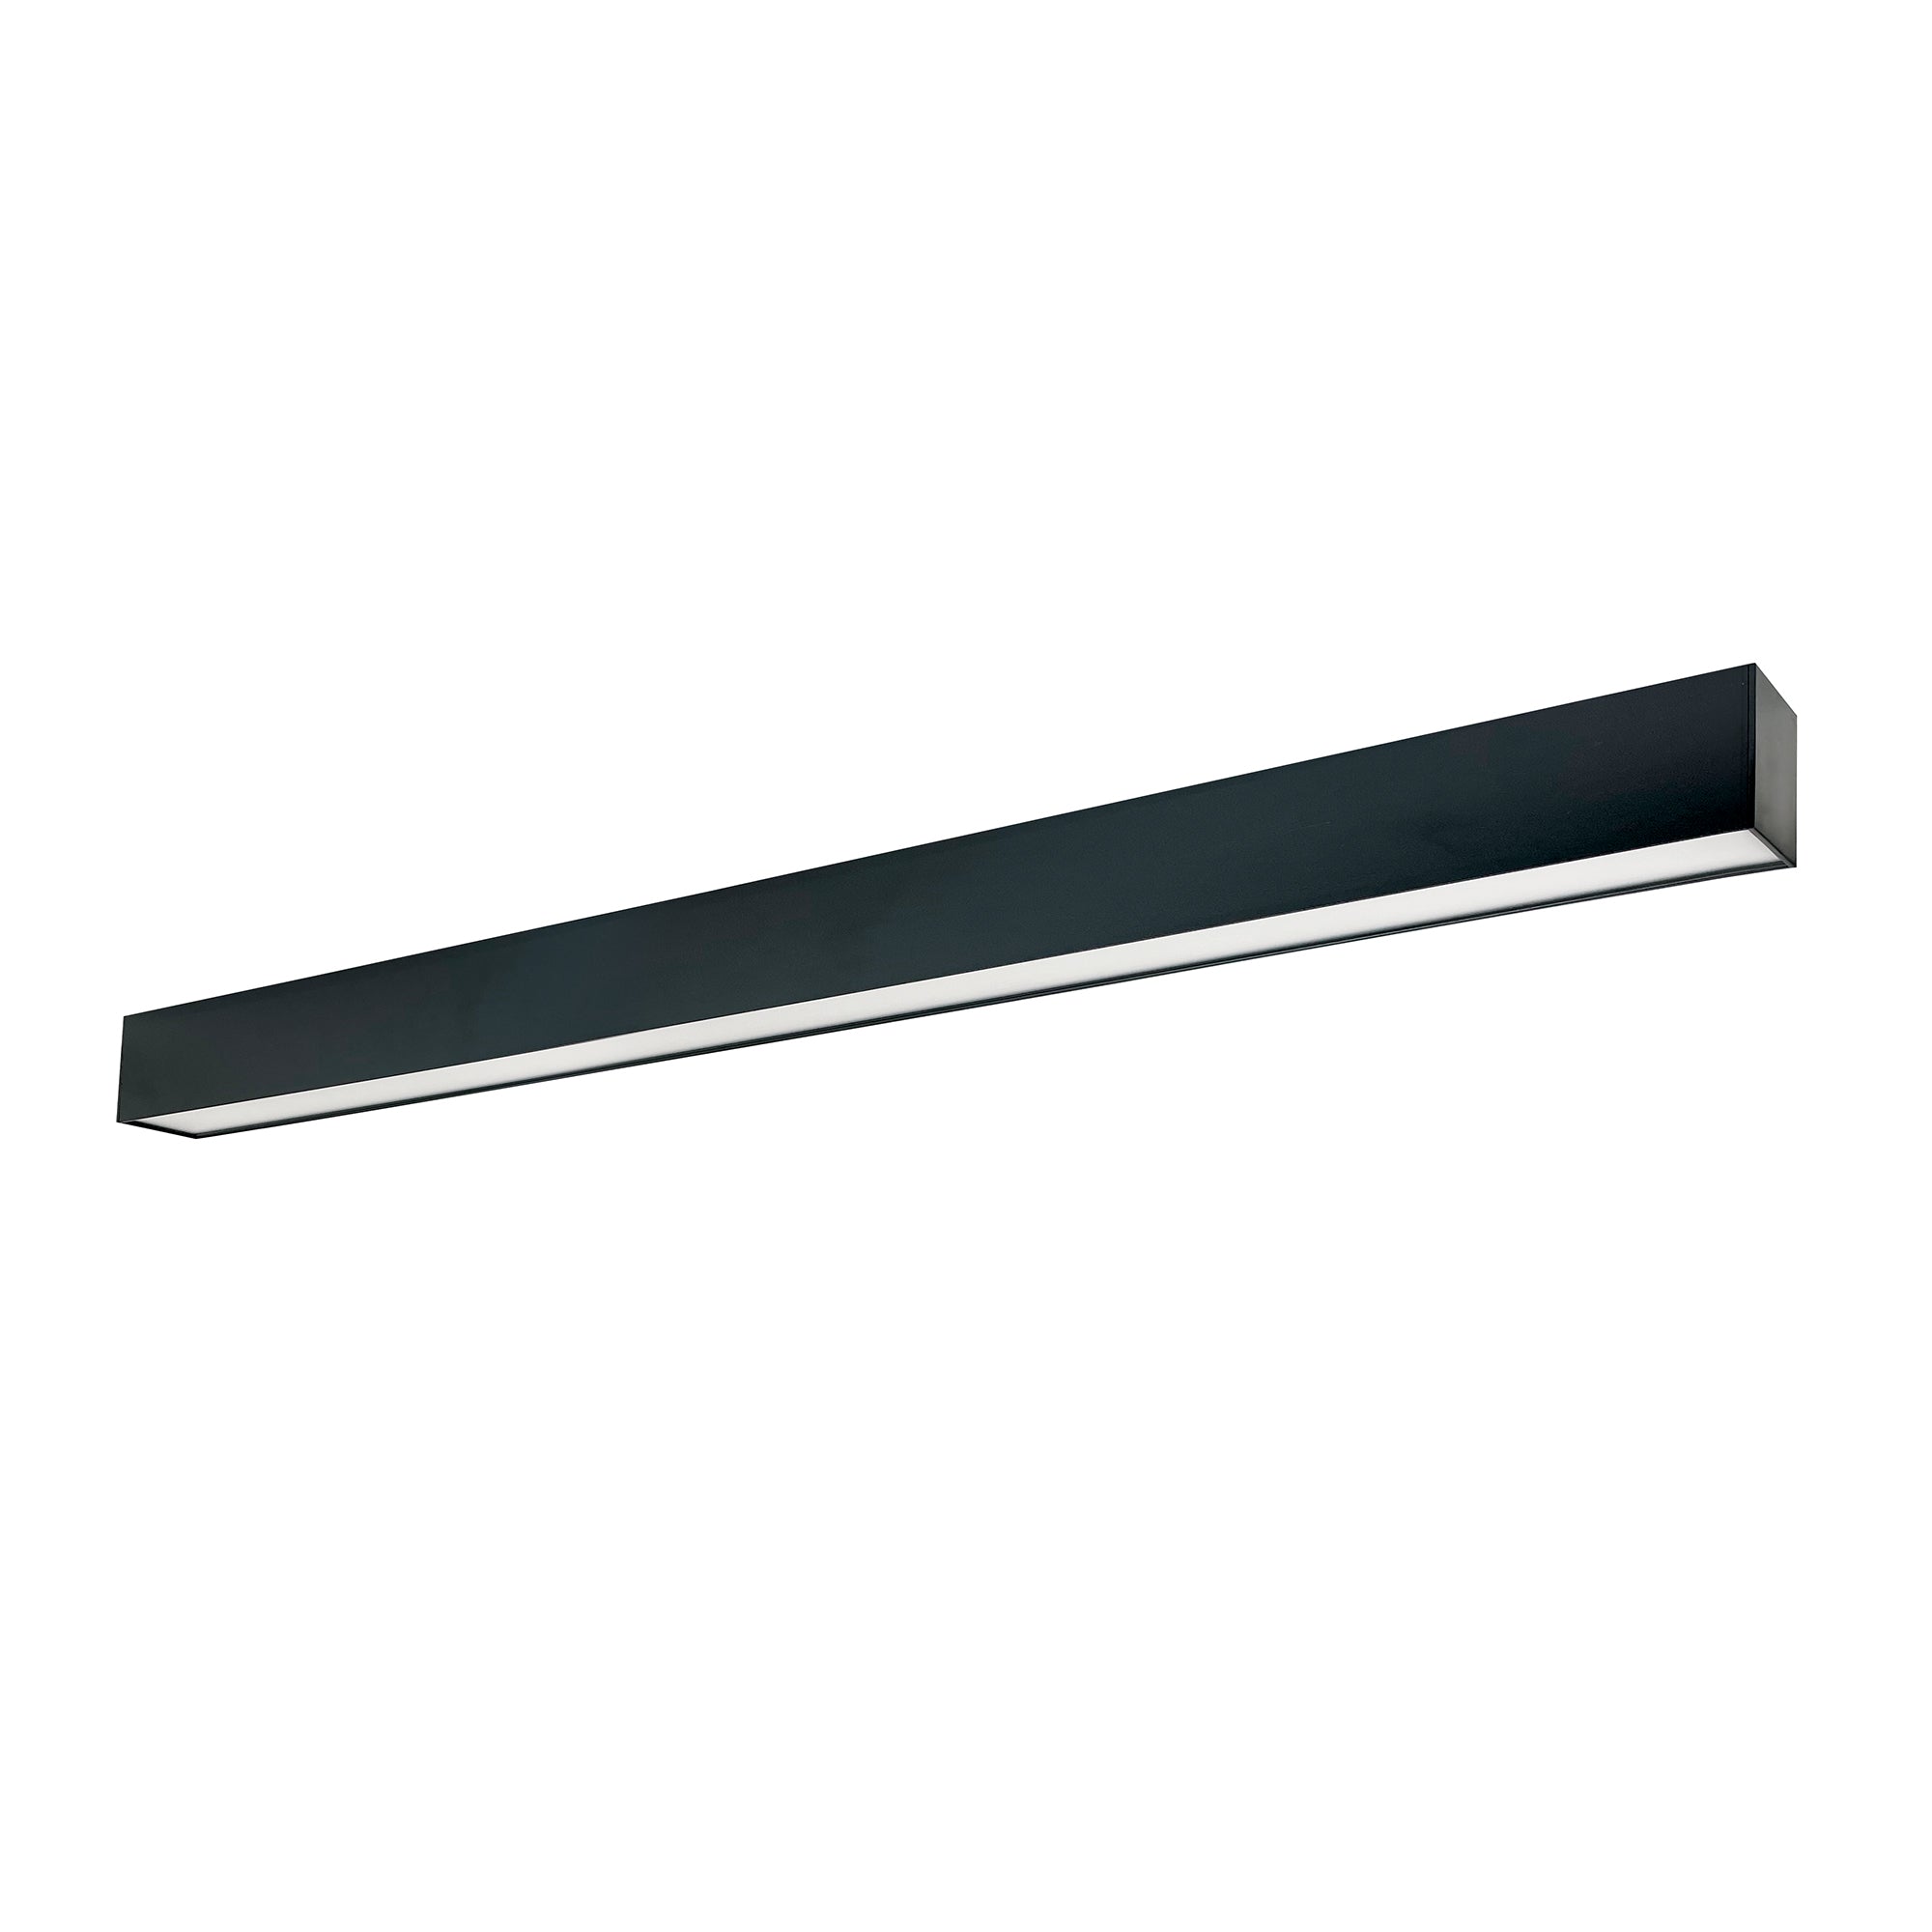 Nora Lighting NLUD-8334B - Linear - 8' L-Line LED Indirect/Direct Linear, 12304lm / Selectable CCT, Black Finish